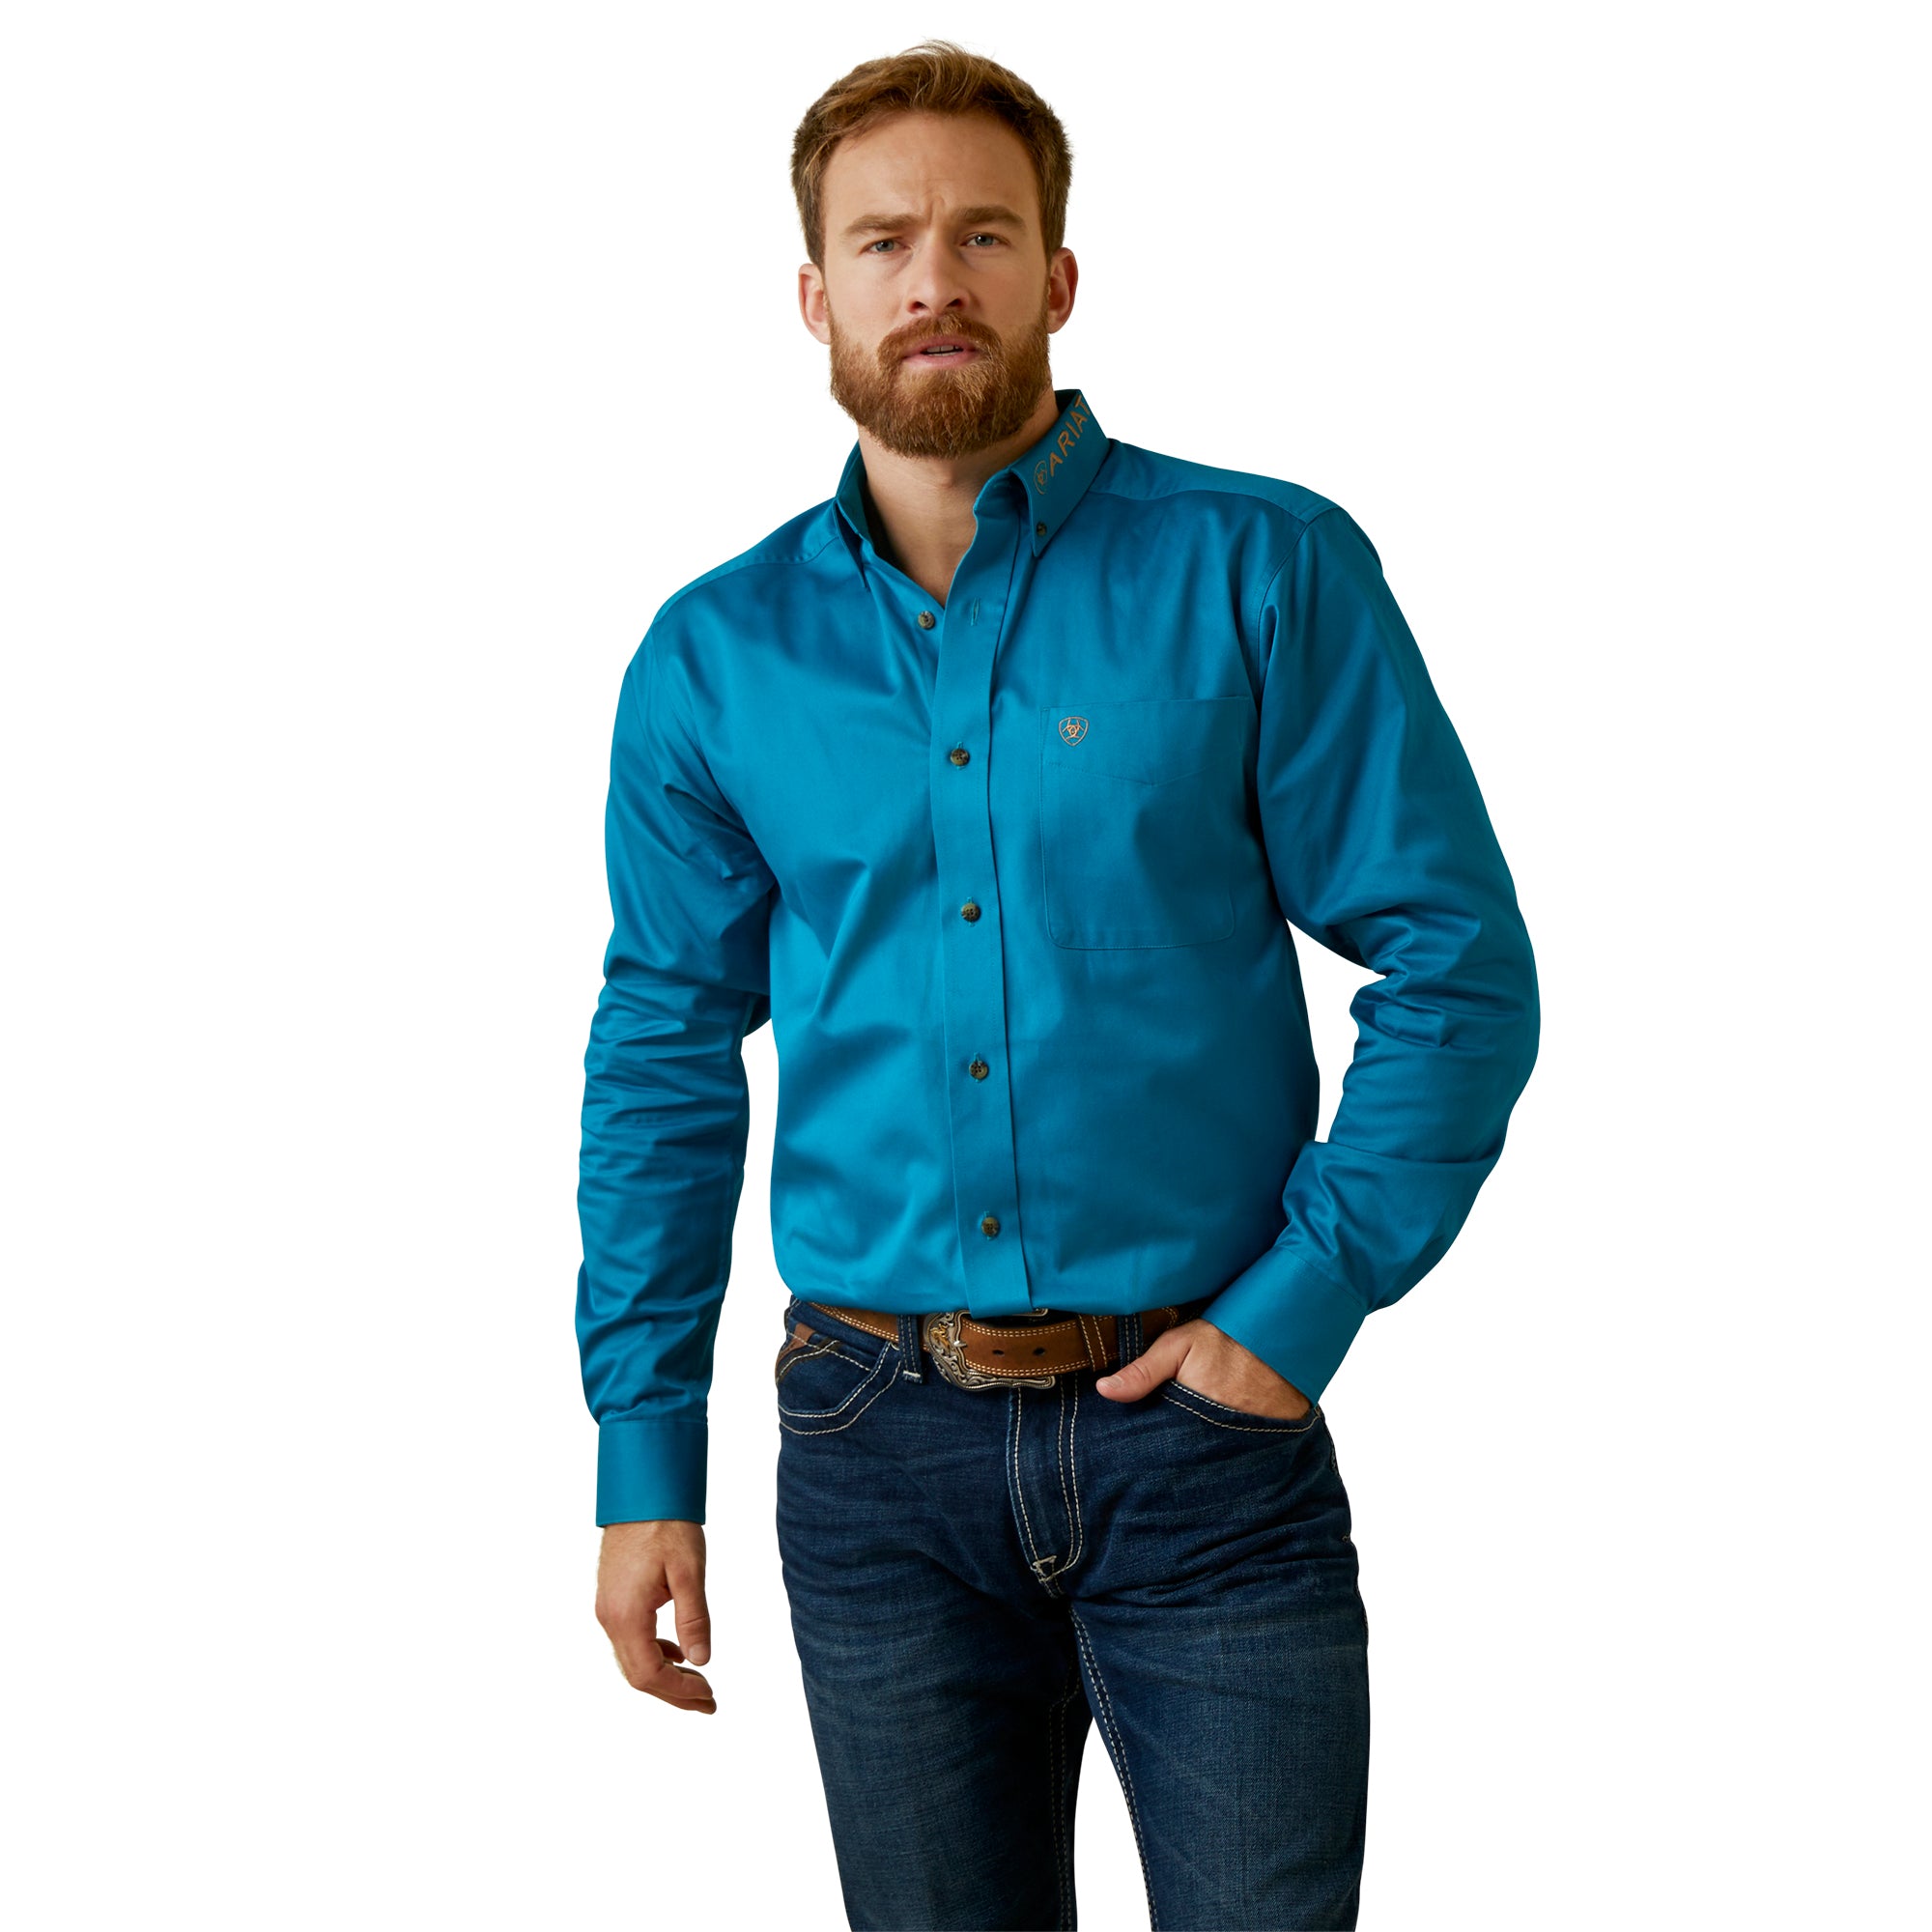 Ariat Western Shirt Team Logo Deep Turquoise Twill Fitted